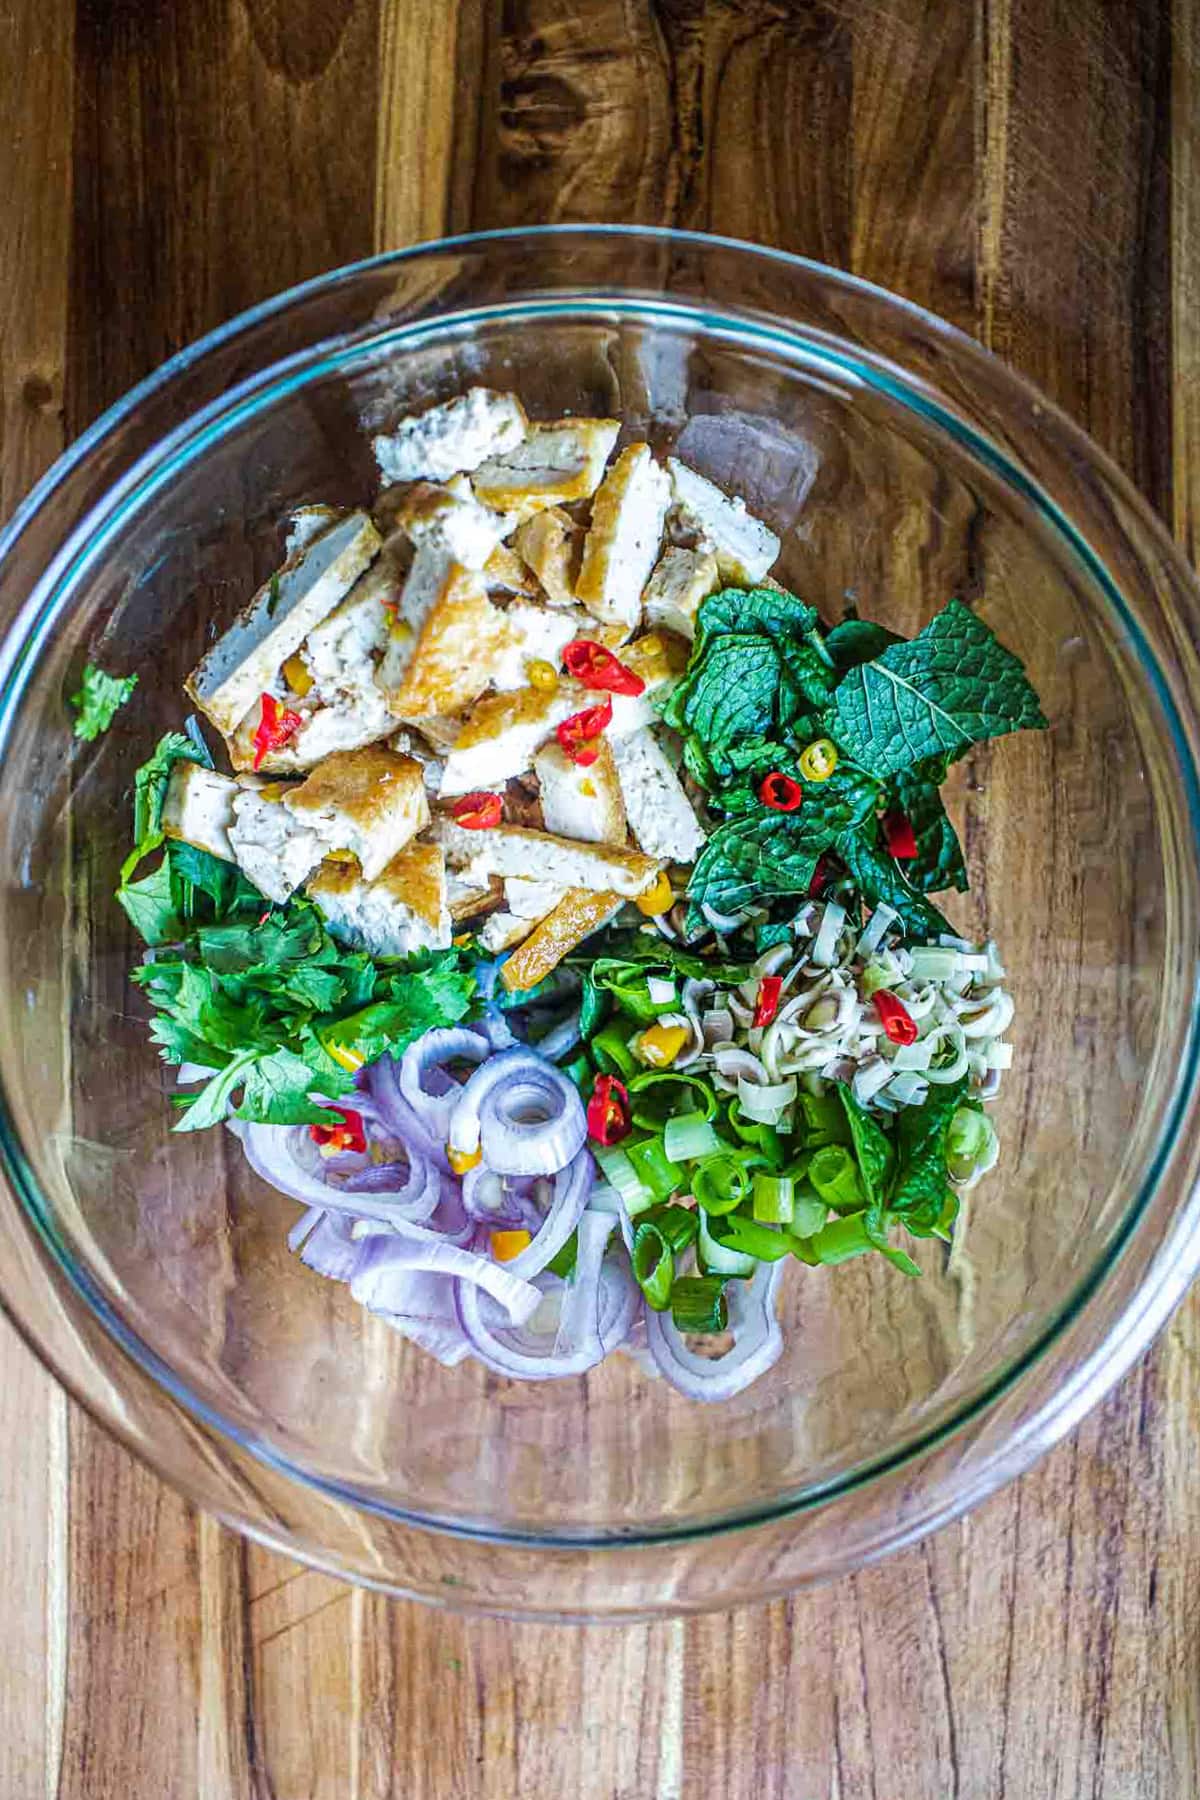 Tofu and herbs salad in a glass bowl